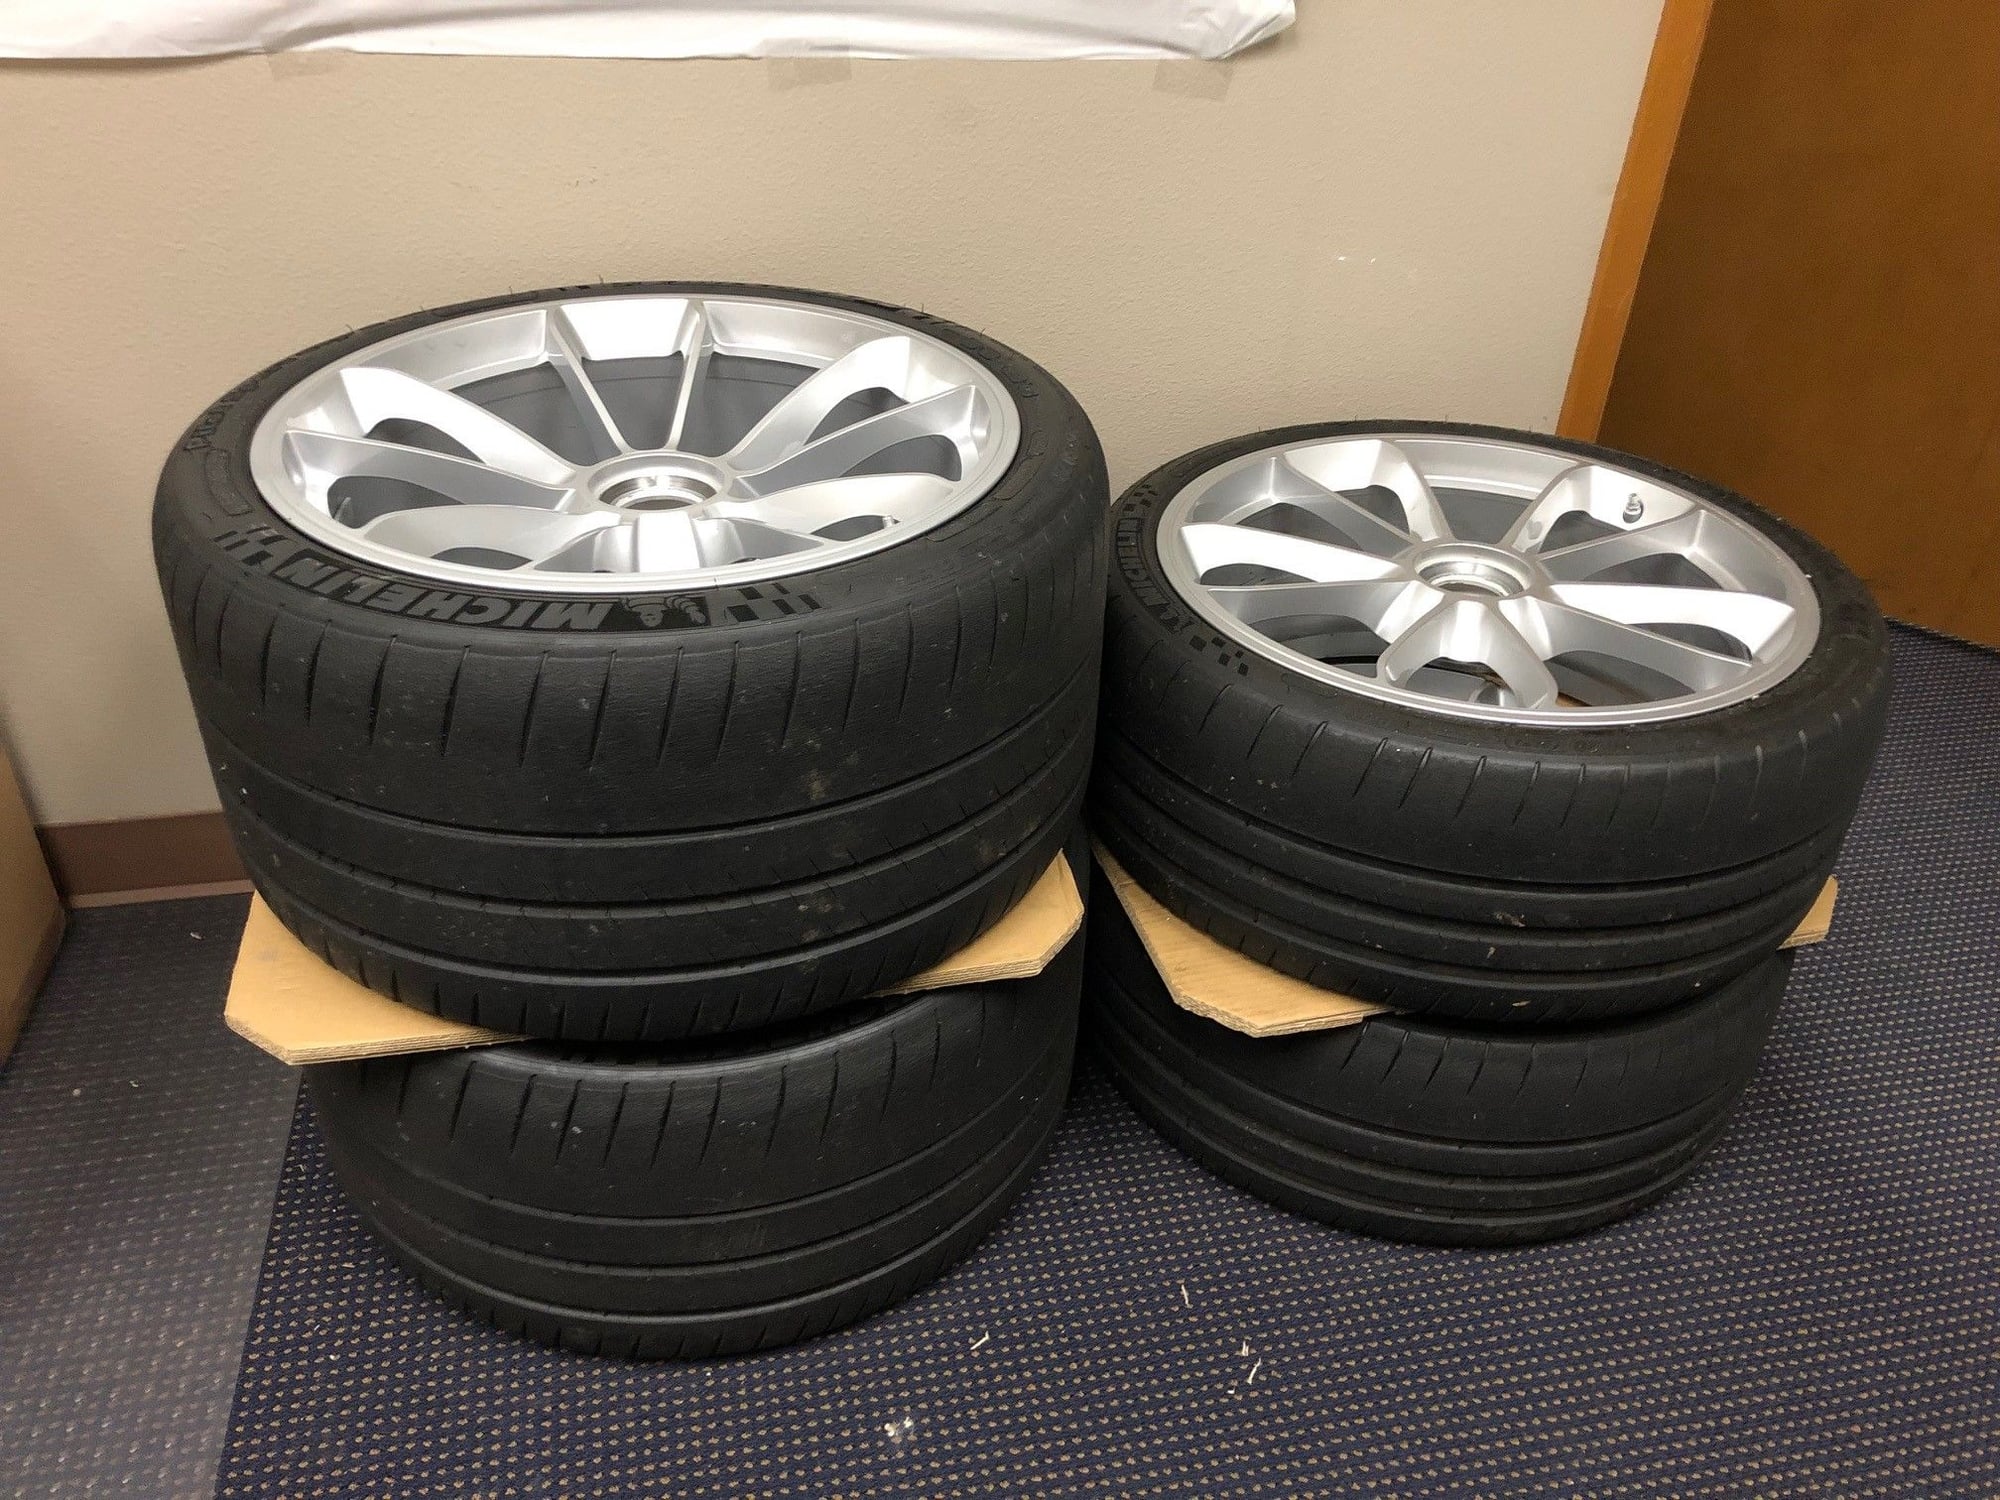 Wheels and Tires/Axles - 991 GT3 Platinum Silver wheels and tires - Used - 2014 to 2016 Porsche GT3 - Tacoma, WA 98424, United States